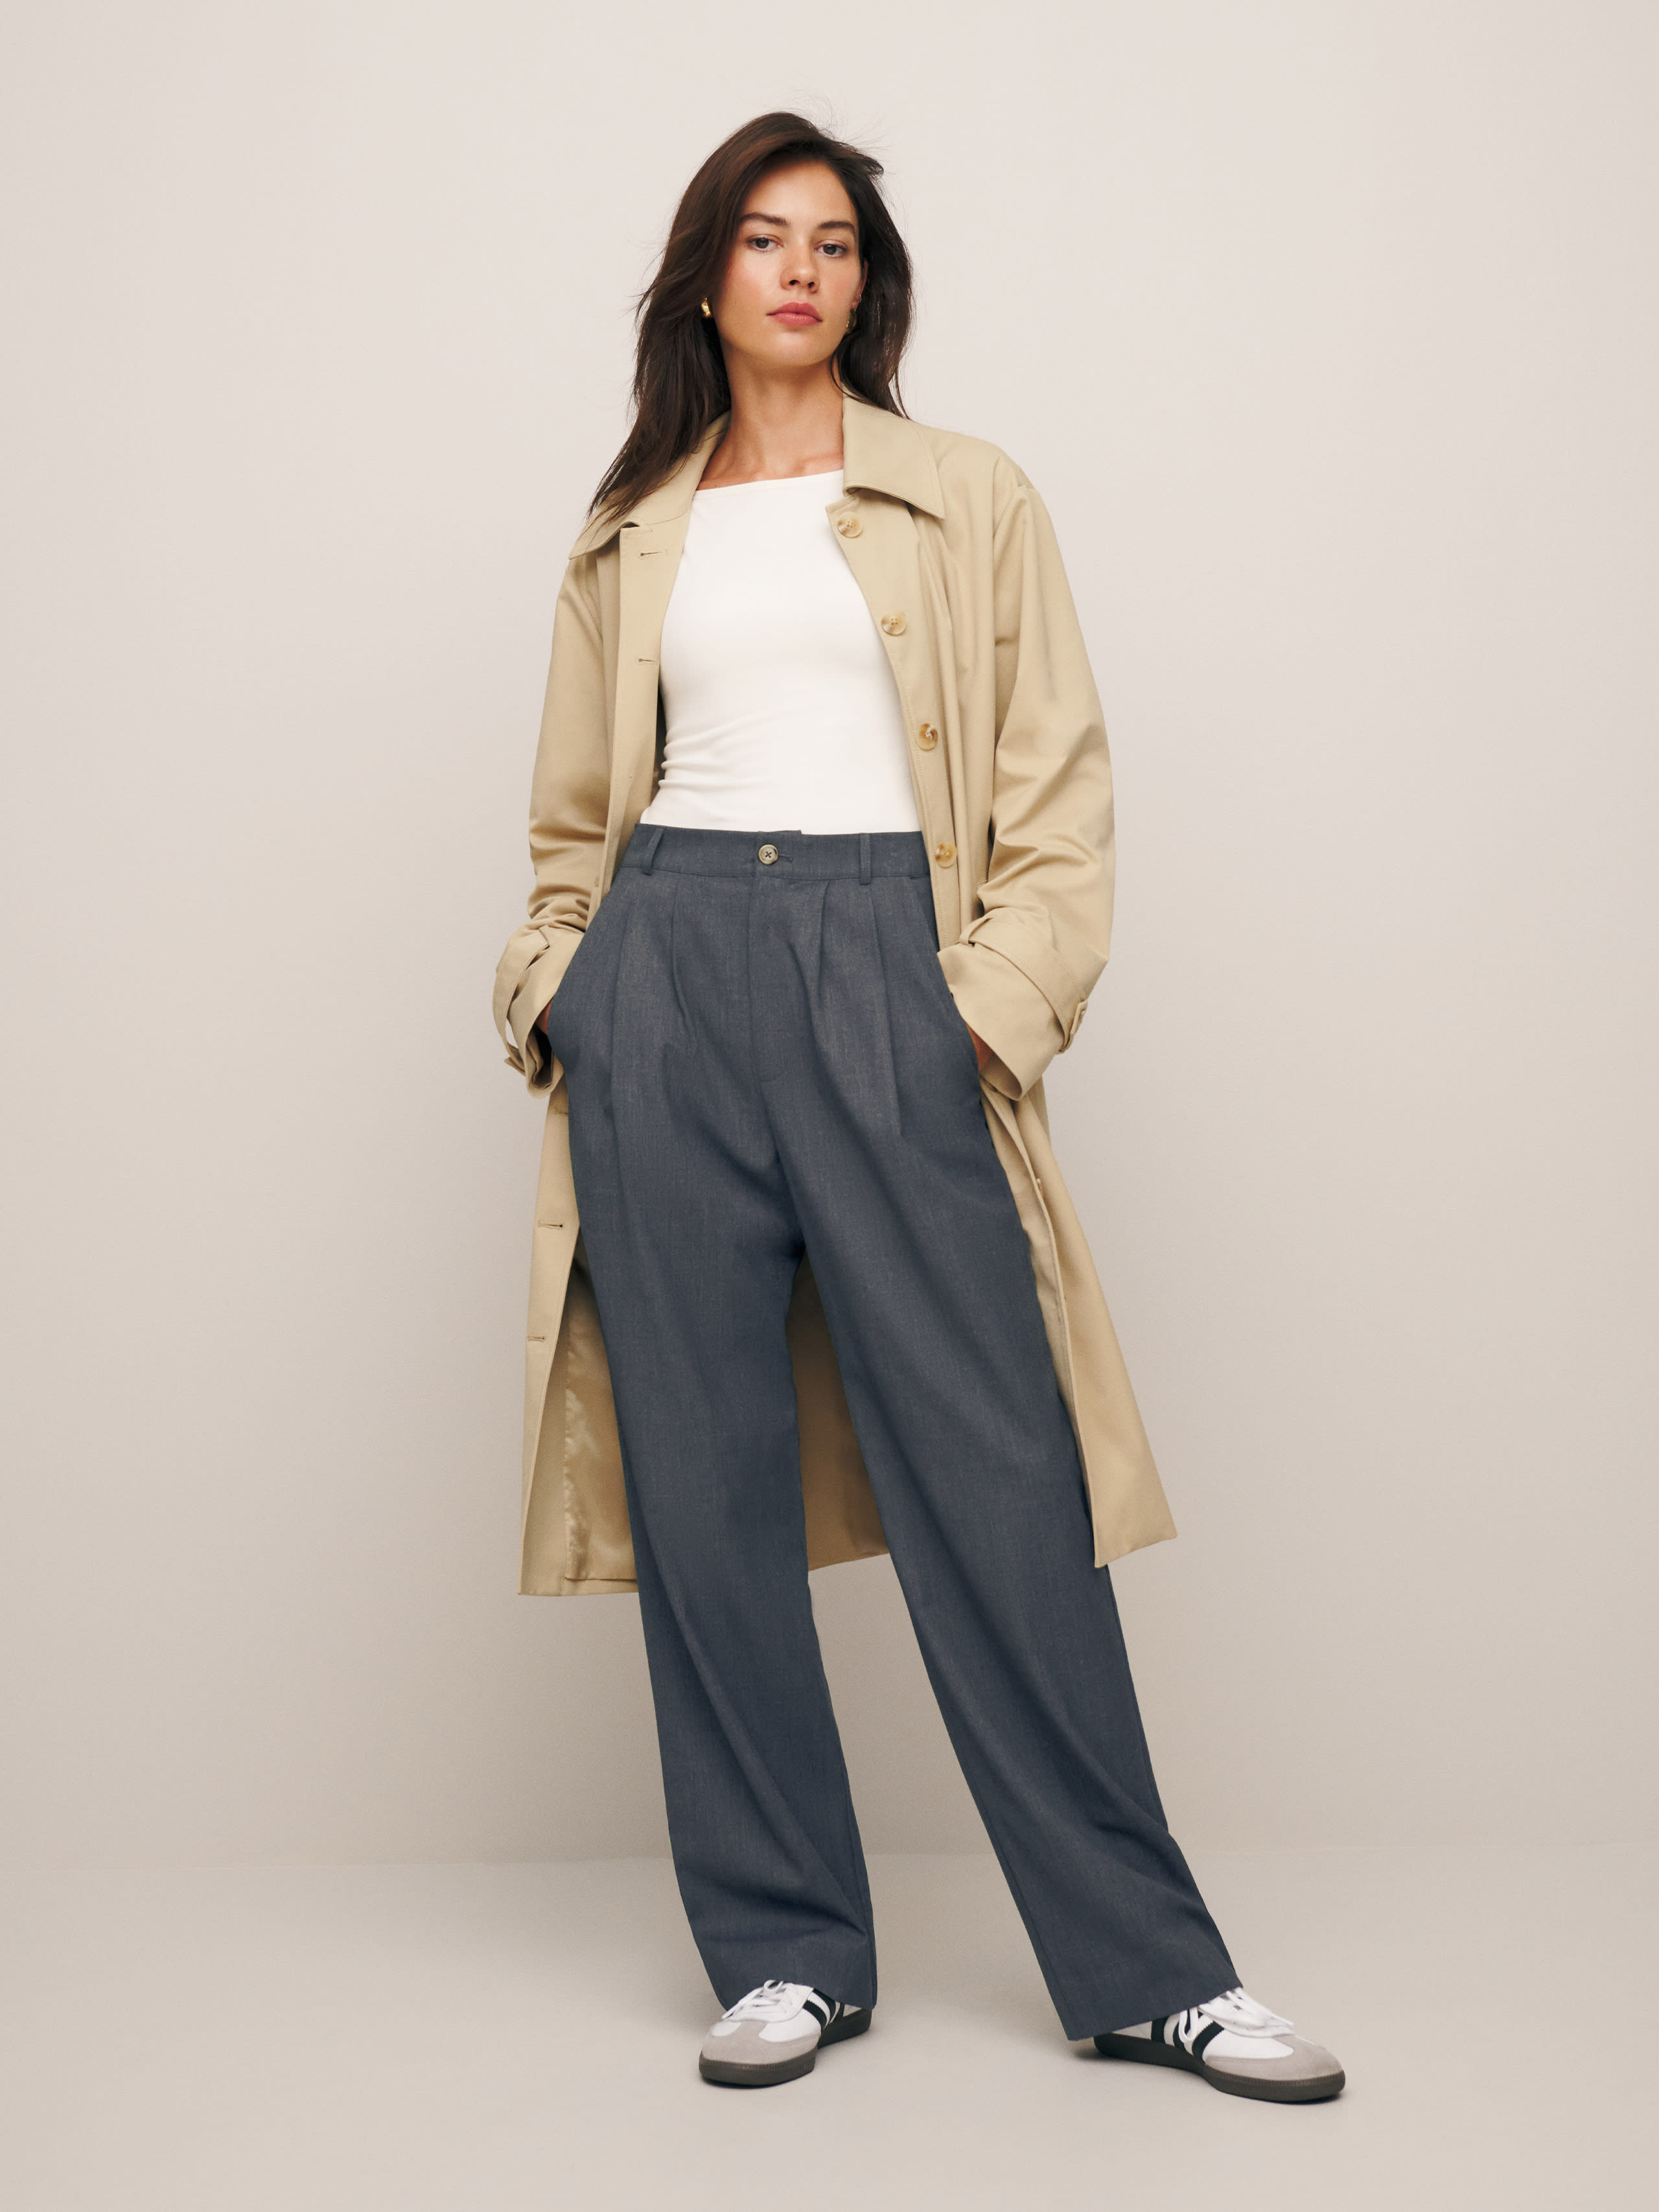 Reformation Petites Mason Trouser In Charcoal